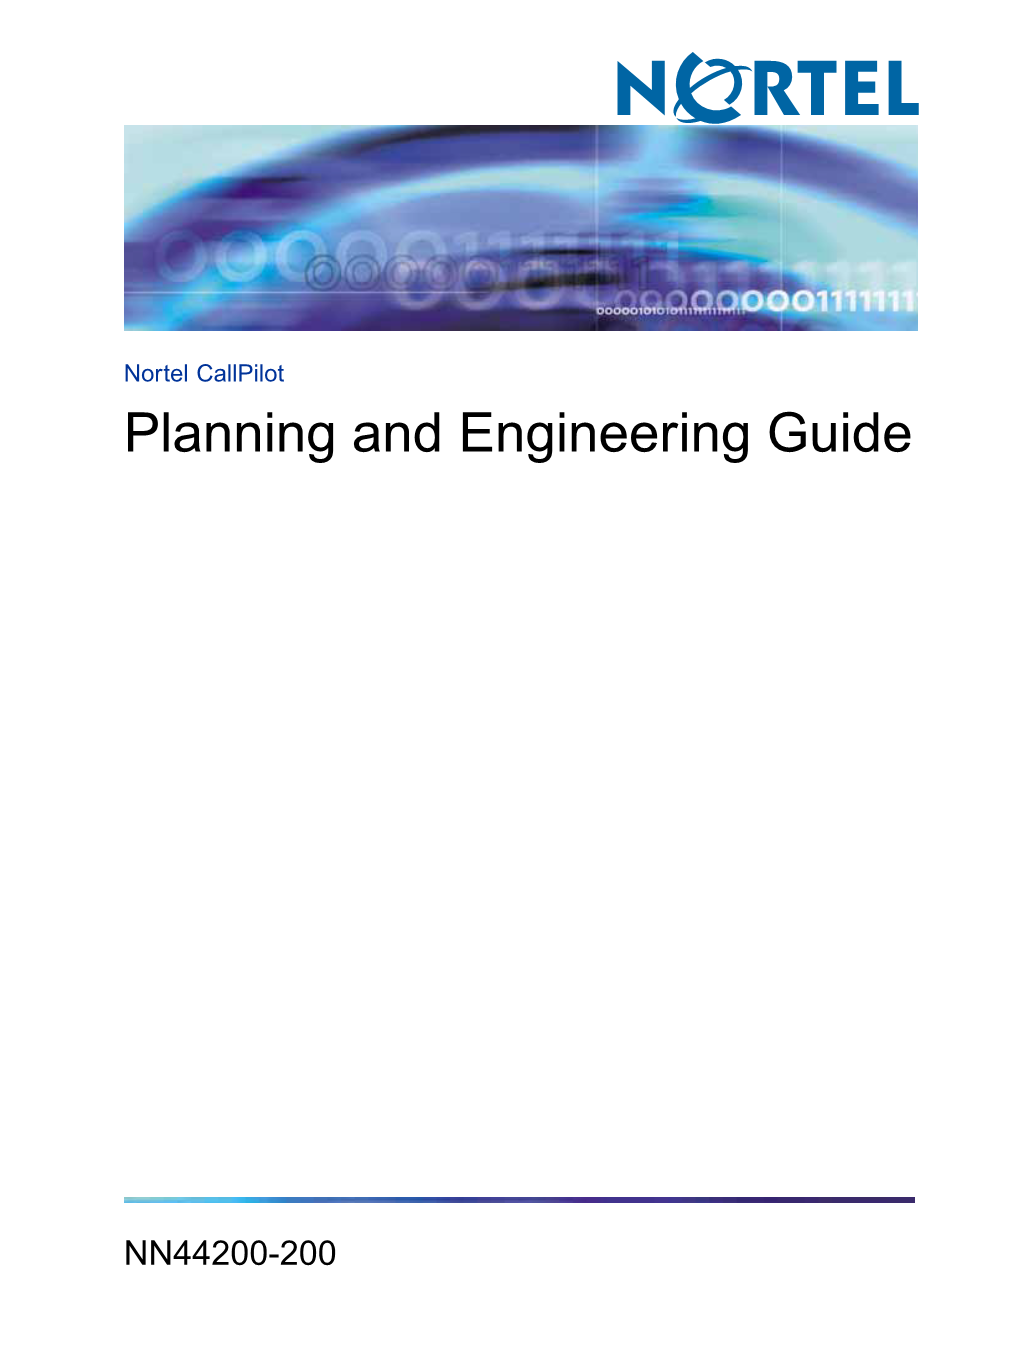 Planning and Engineering Guide